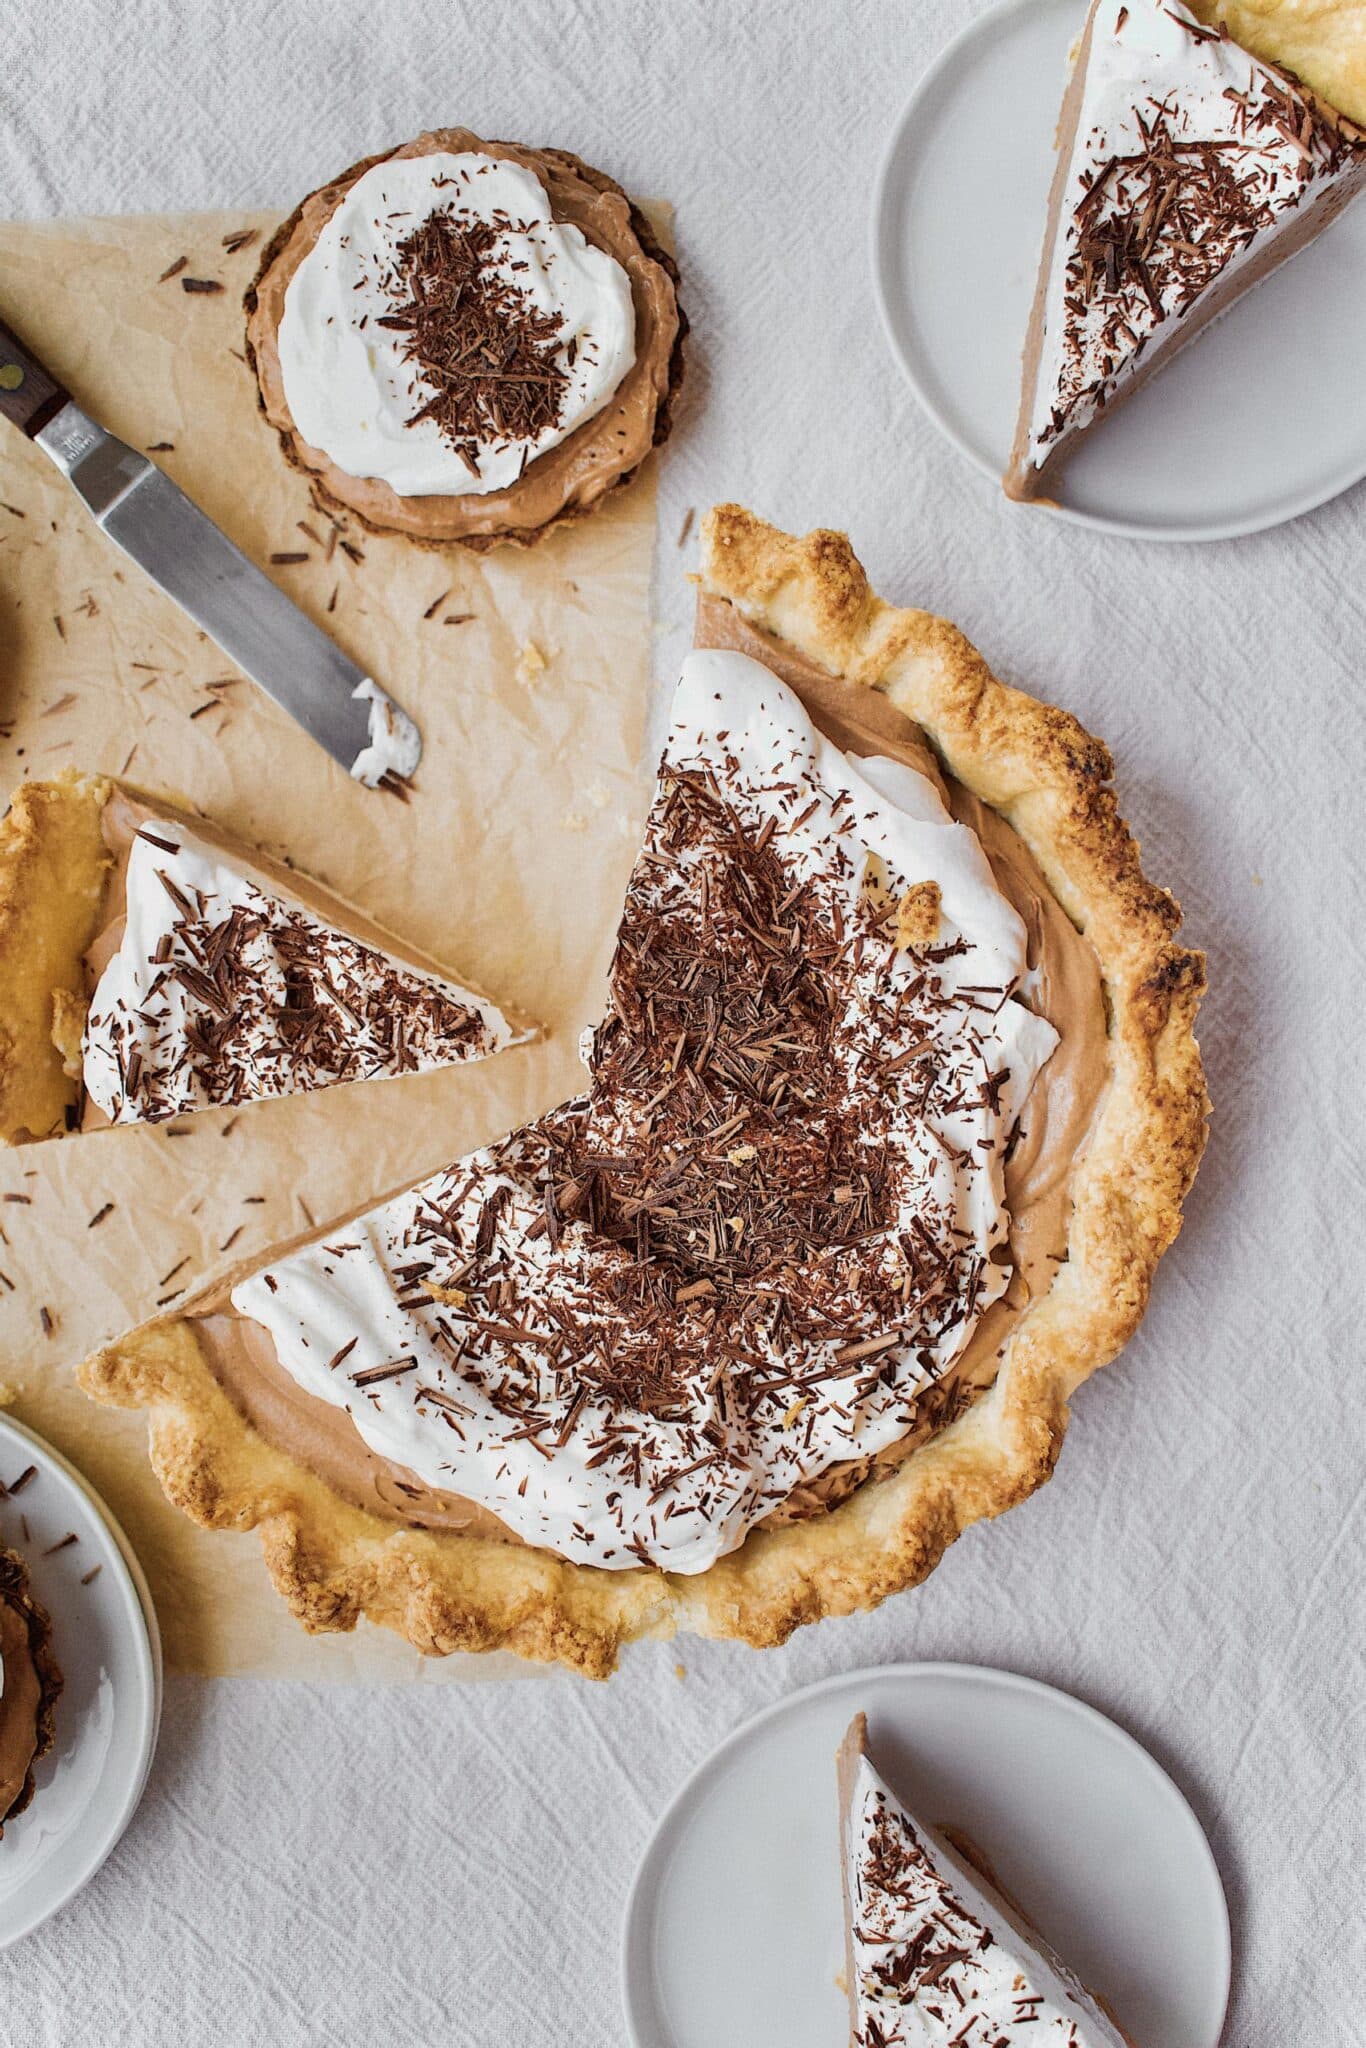 Joanna Gaines French Silk Pie that has been sliced, with tartlets around it